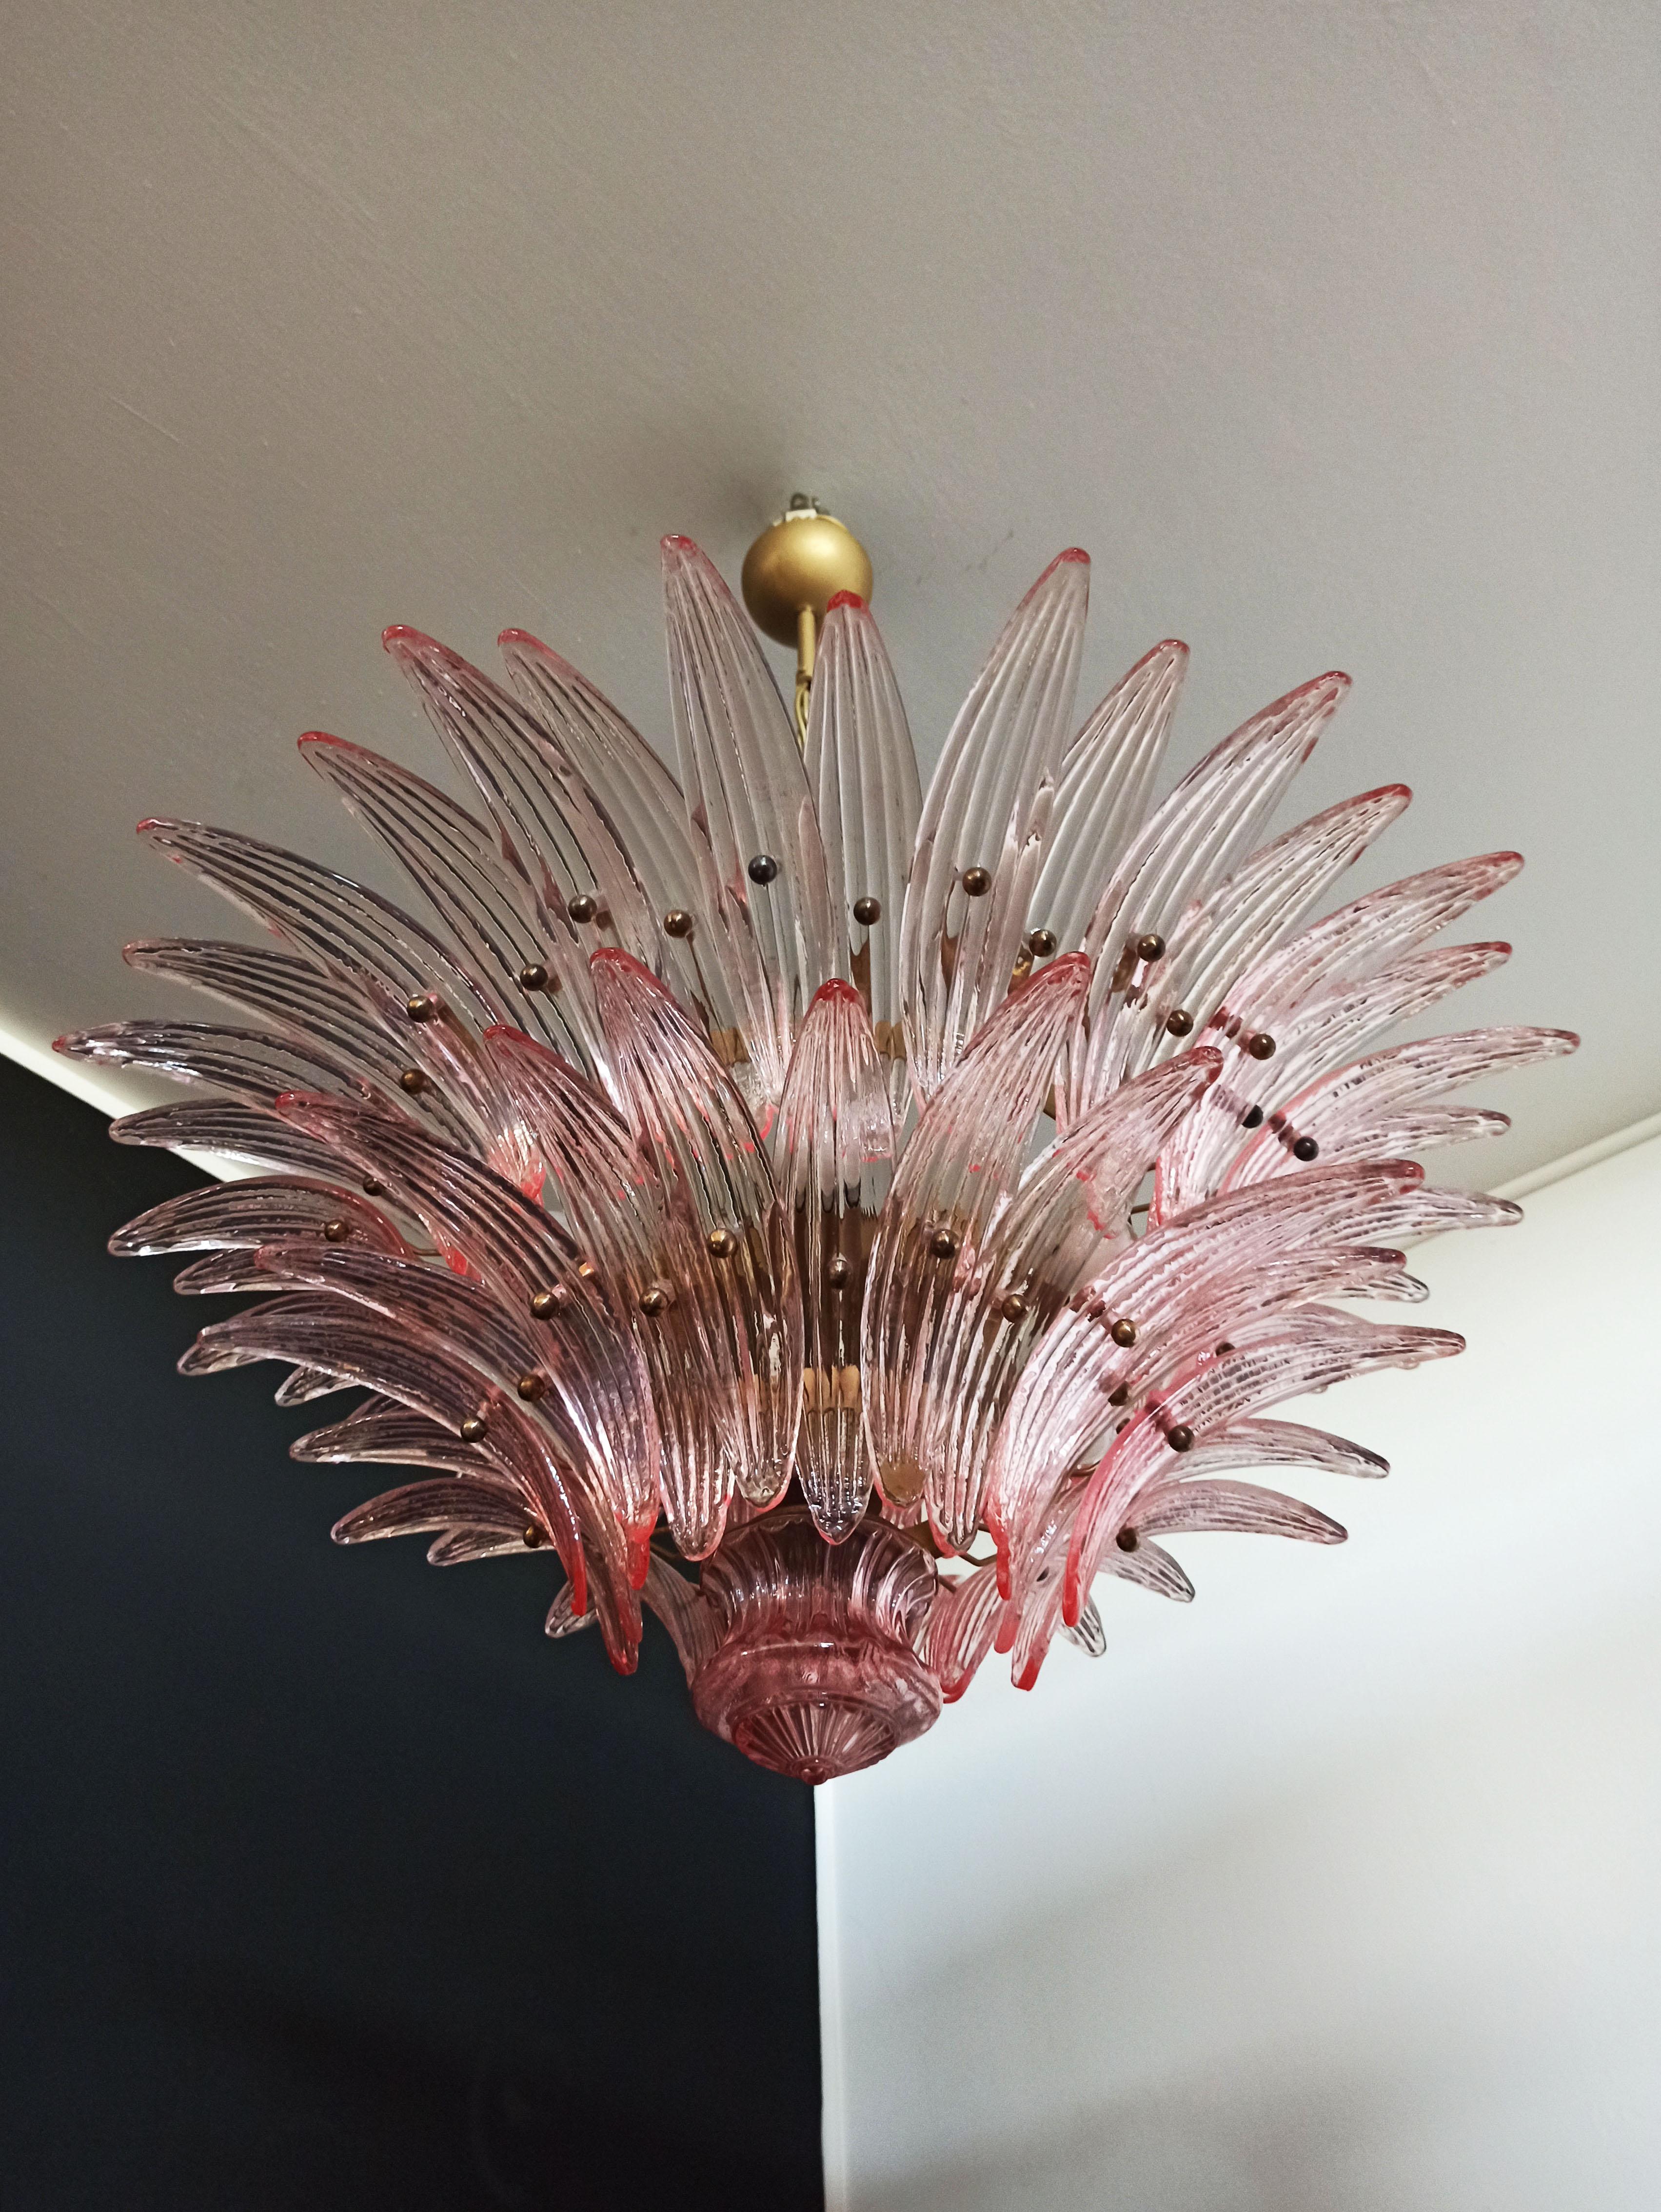 Luxury and genuine Murano glass chandelier. Hand made in Murano. It made by 58 Murano pink glasses in a gold metal frame. The chandelier has also a Murano glass ball in the end of the lamp. Murano blown glass in a traditional way.
Period: 1970's /